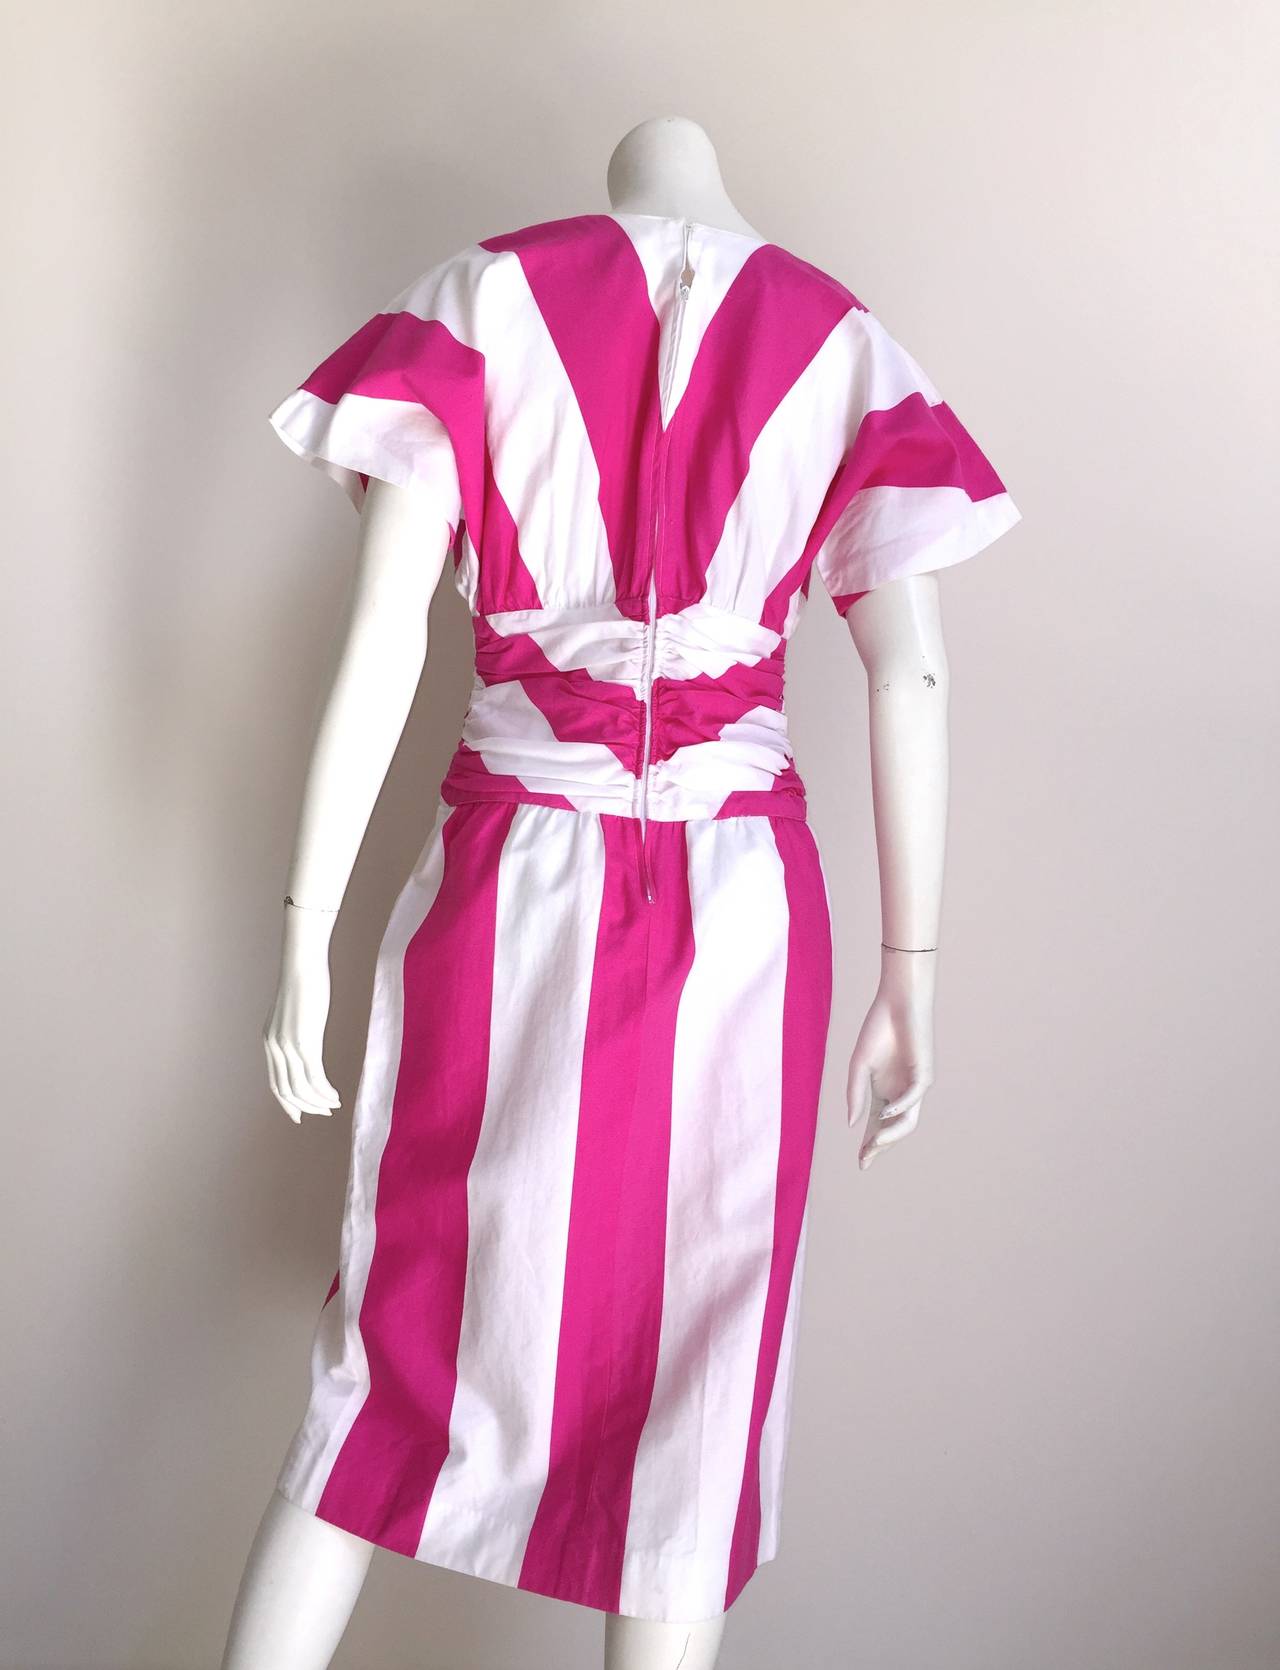 Malcolm Starr 1970s Pink & White Striped Cotton Dress Size 6. For Sale 1